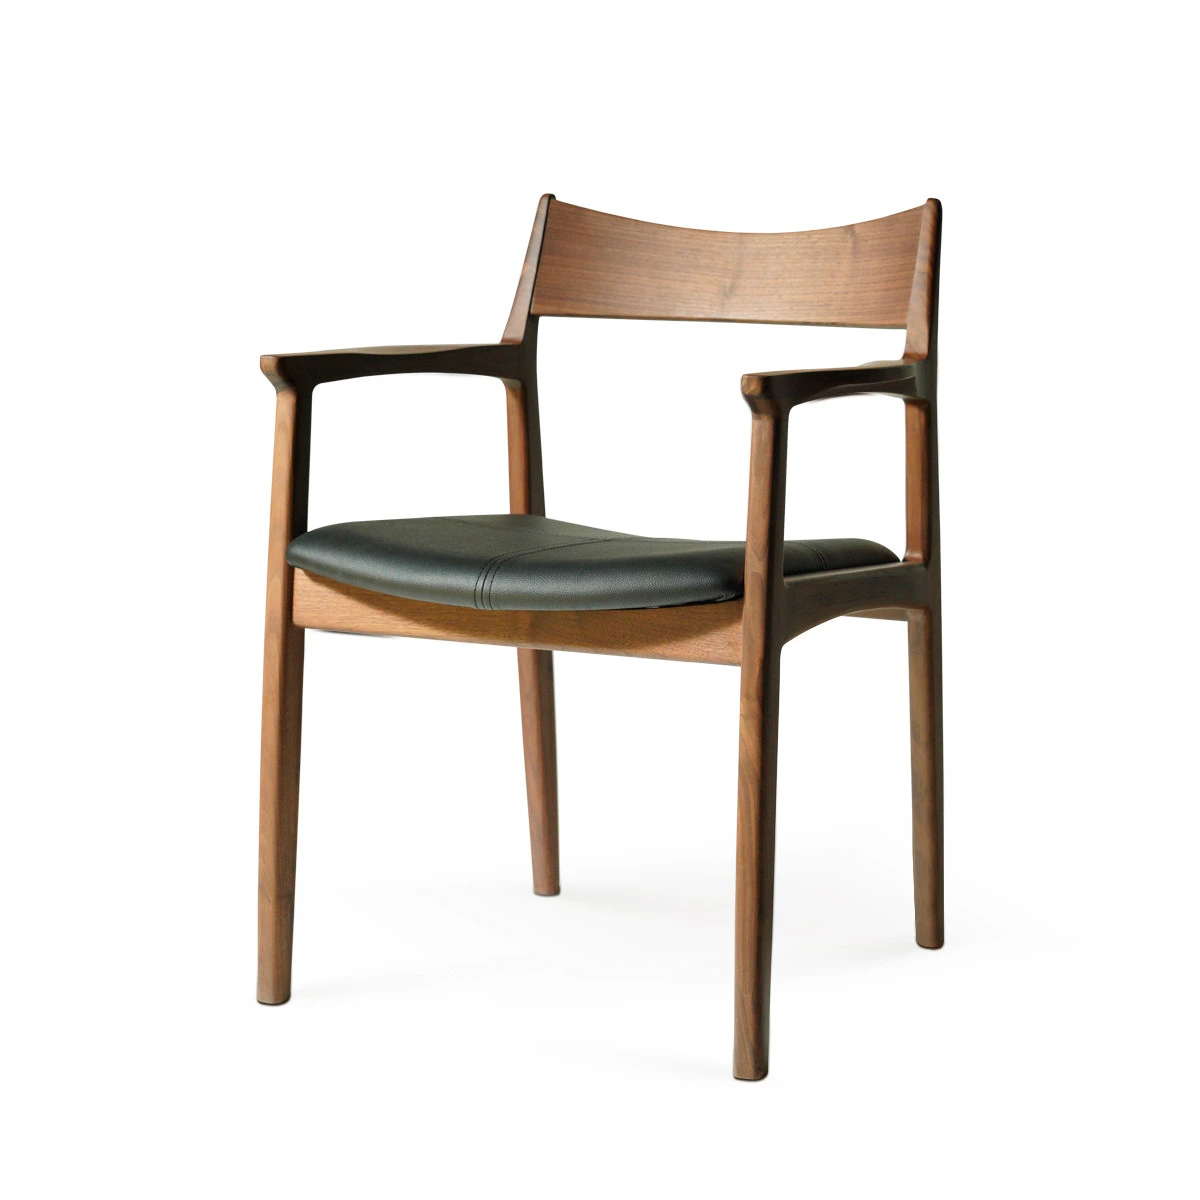 Walnut Wood Dining Chair, Modern Chair Solid Wood Made In Vietnam, DC001